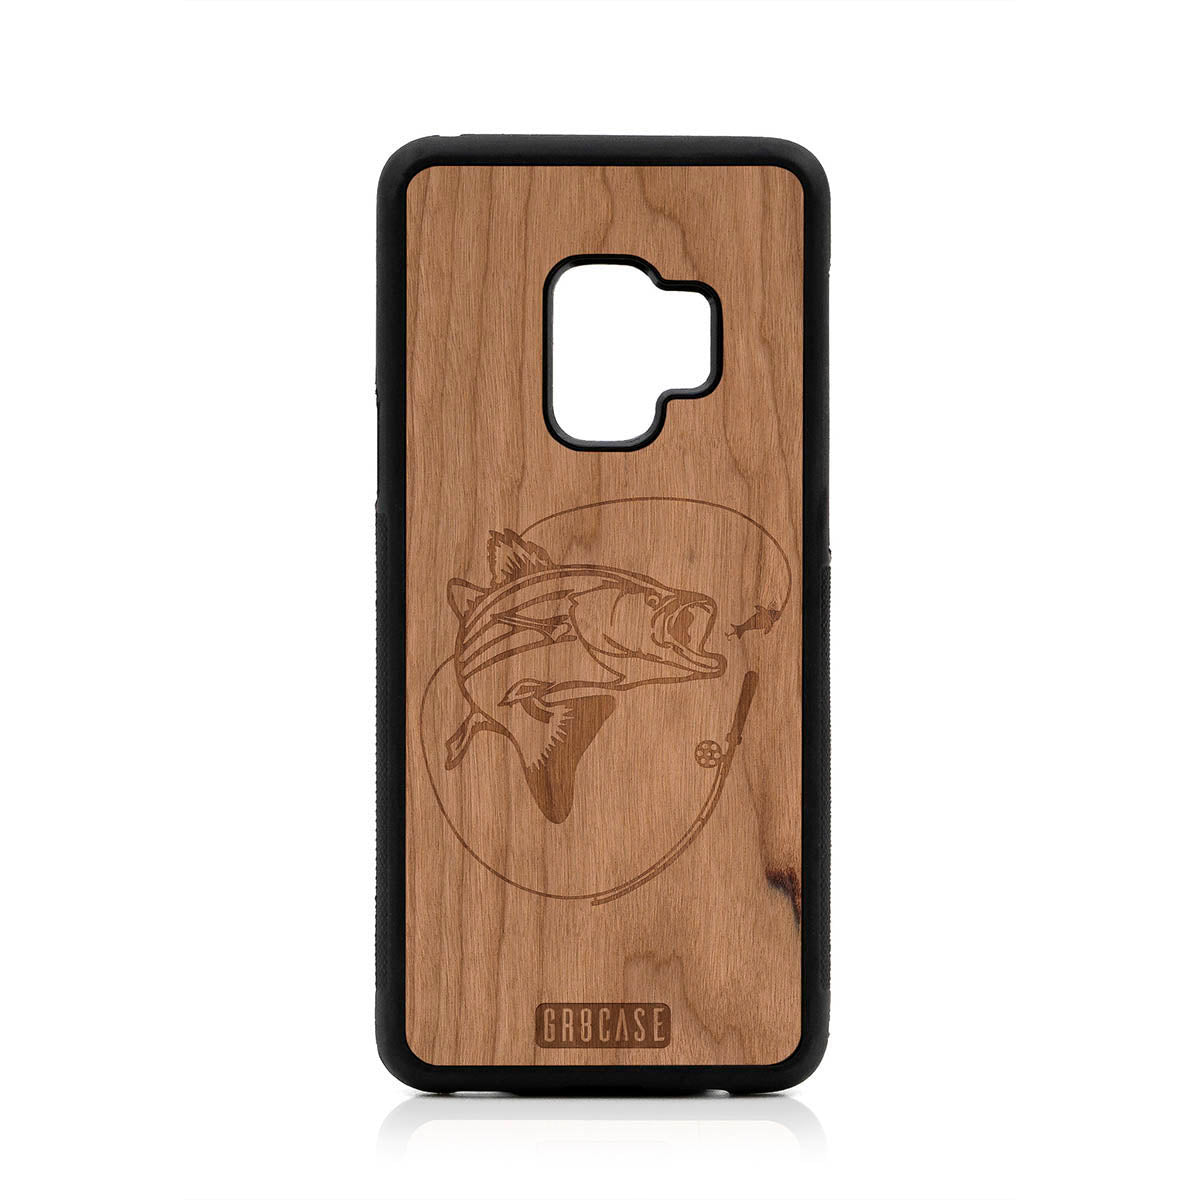 Fish and Reel Design Wood Case For Samsung Galaxy S9 by GR8CASE